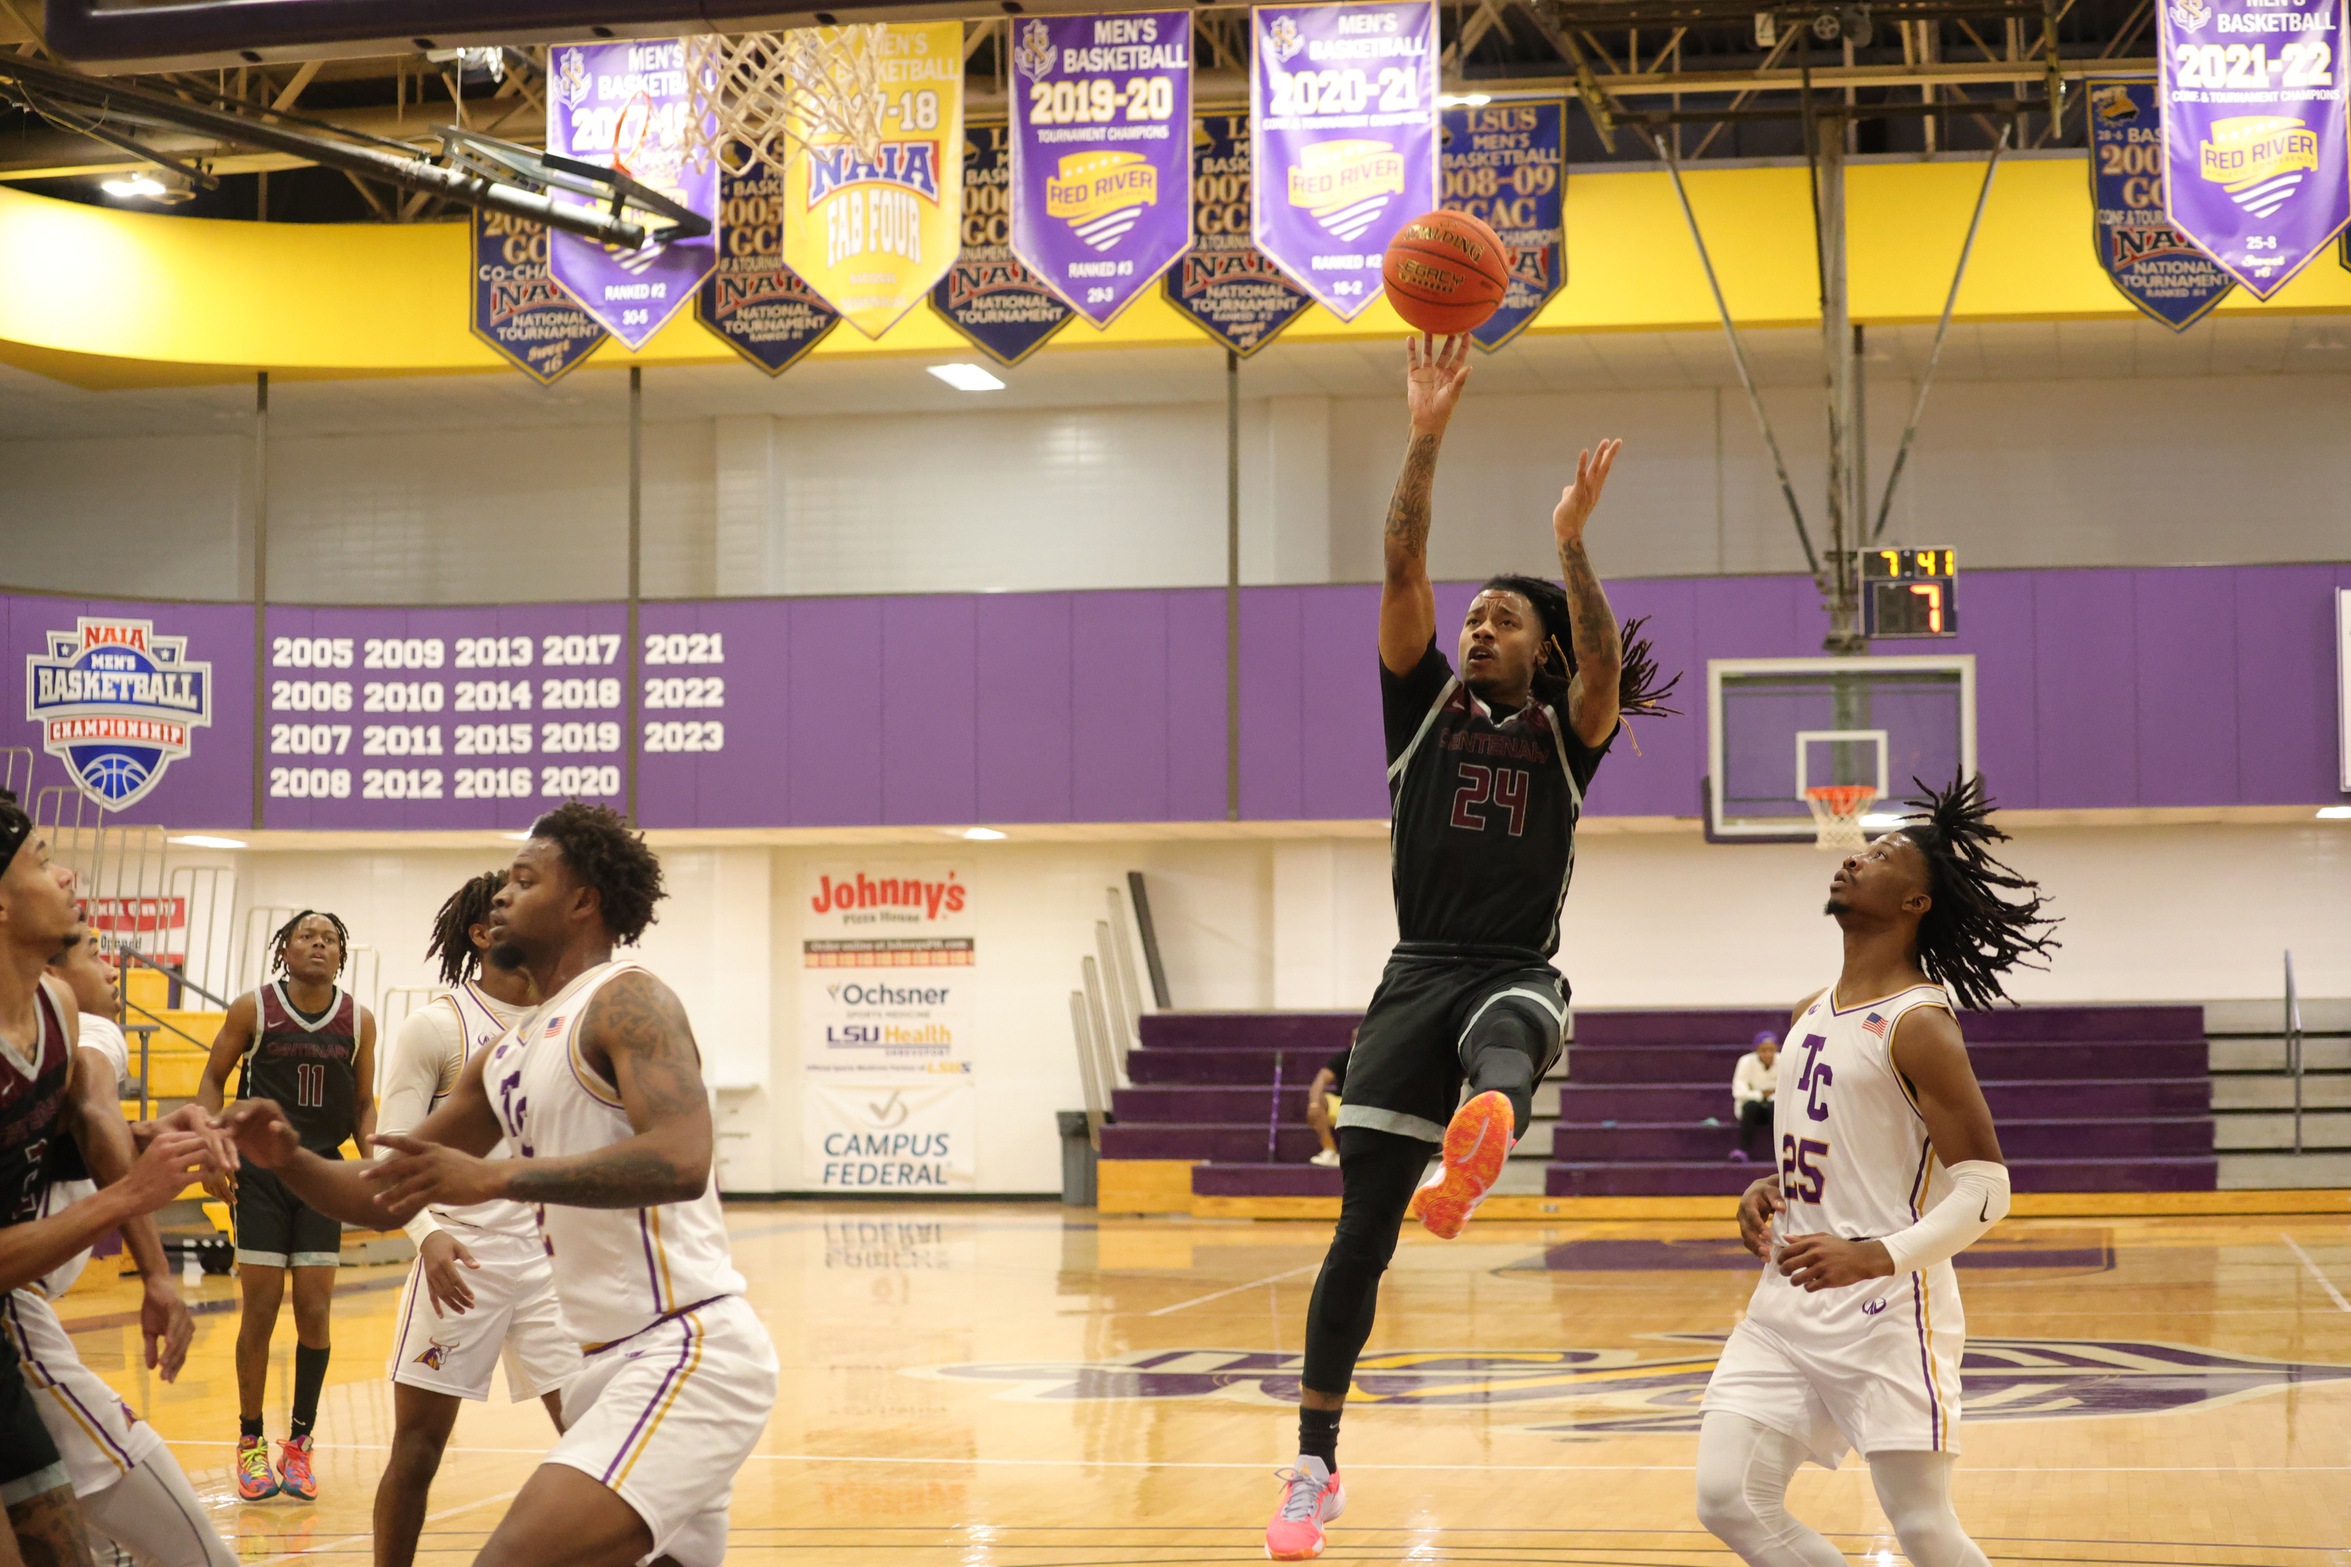 Senior G AJ Hall and the Gents fell short, 67-61, on Tuesday to Texas College.